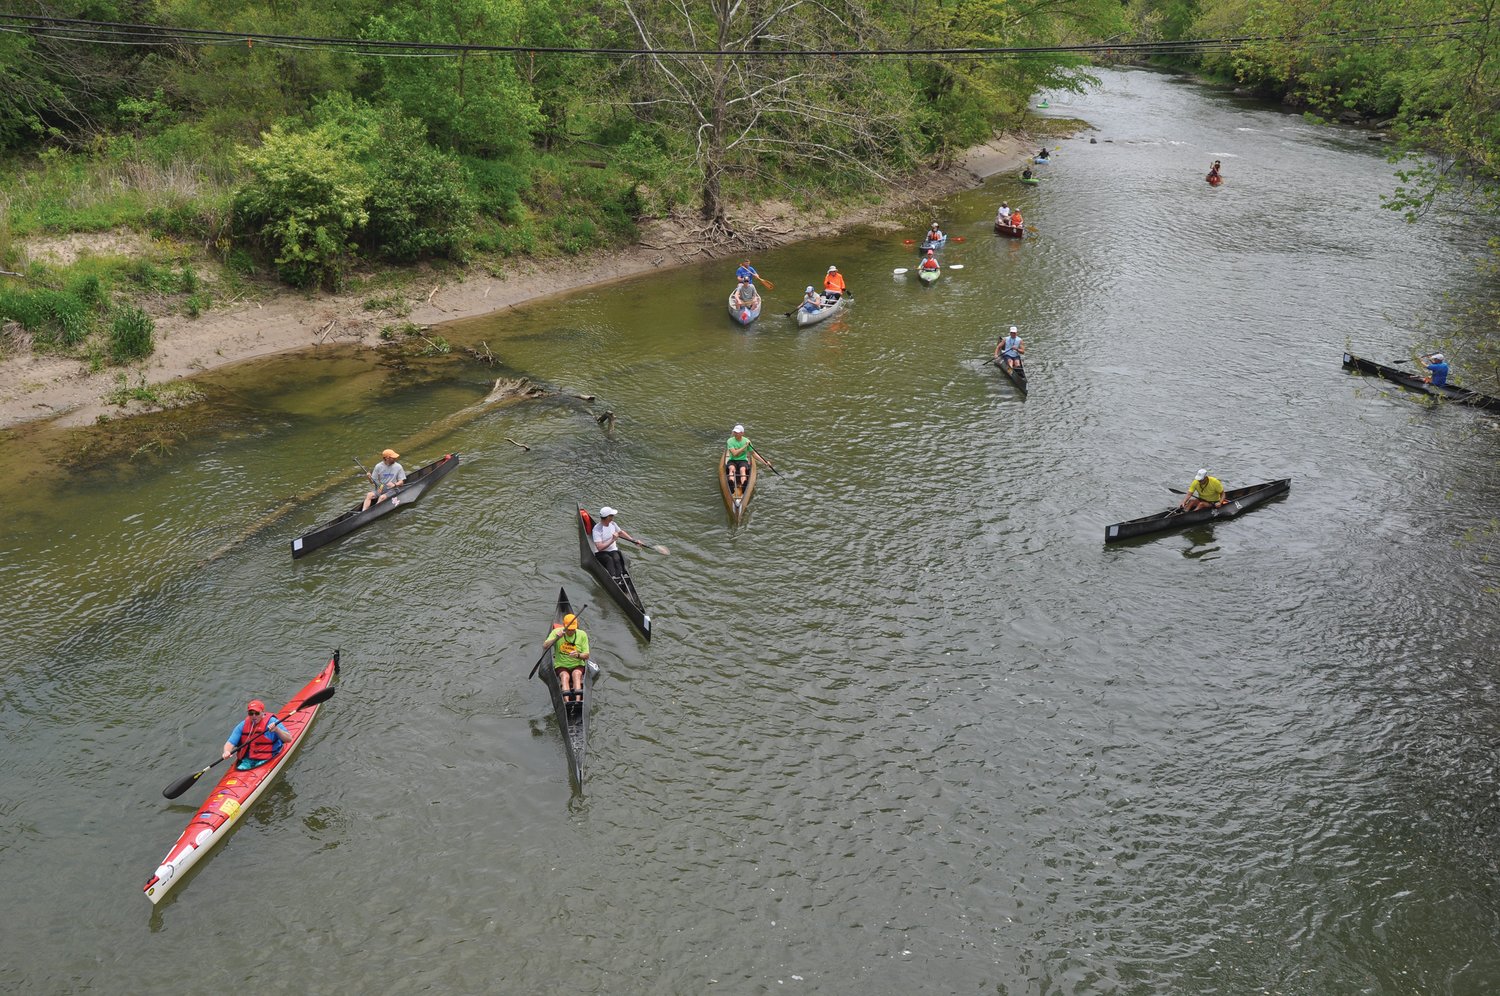 Paddlers leave the Old Coke Plant launch site in May 2021 for the Friends of Sugar Creek Canoe Race.